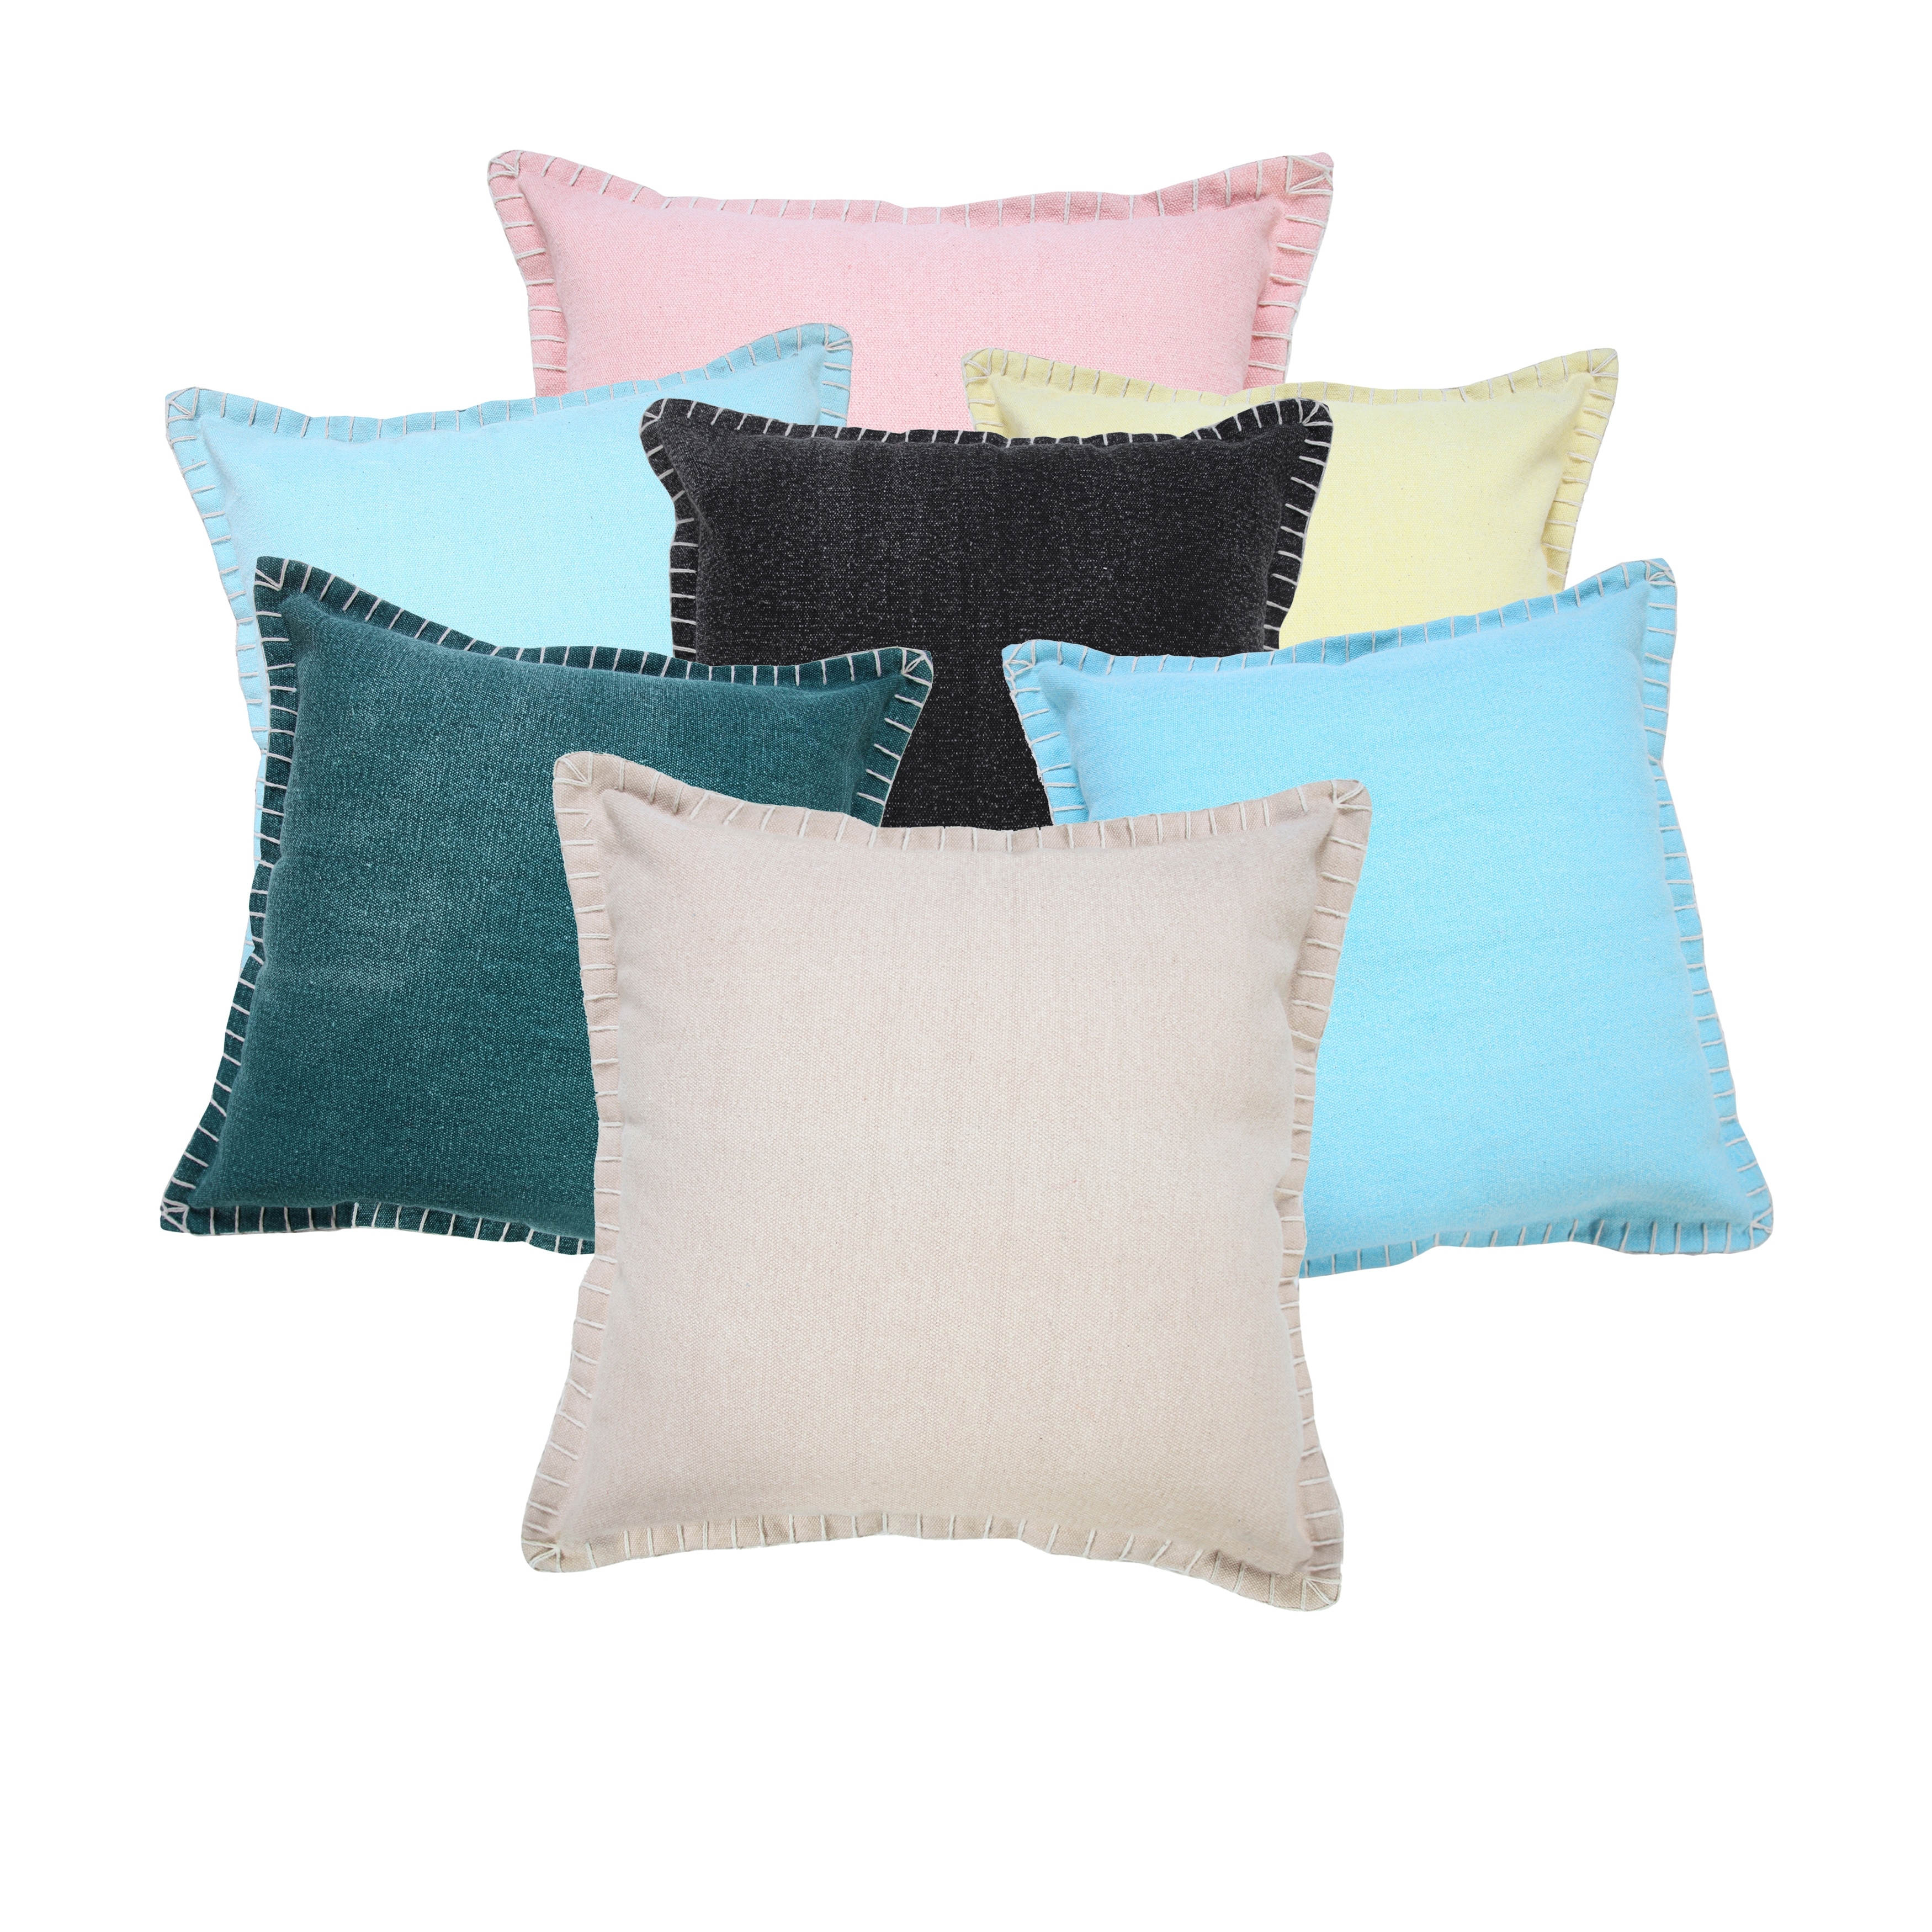 https://ak1.ostkcdn.com/images/products/is/images/direct/f69731f92f1f9b4a12c68e5bf5c73e2564470cfd/LR-Home-Vita-Embroidered-Edge-Cotton-Throw-Pillow.jpg